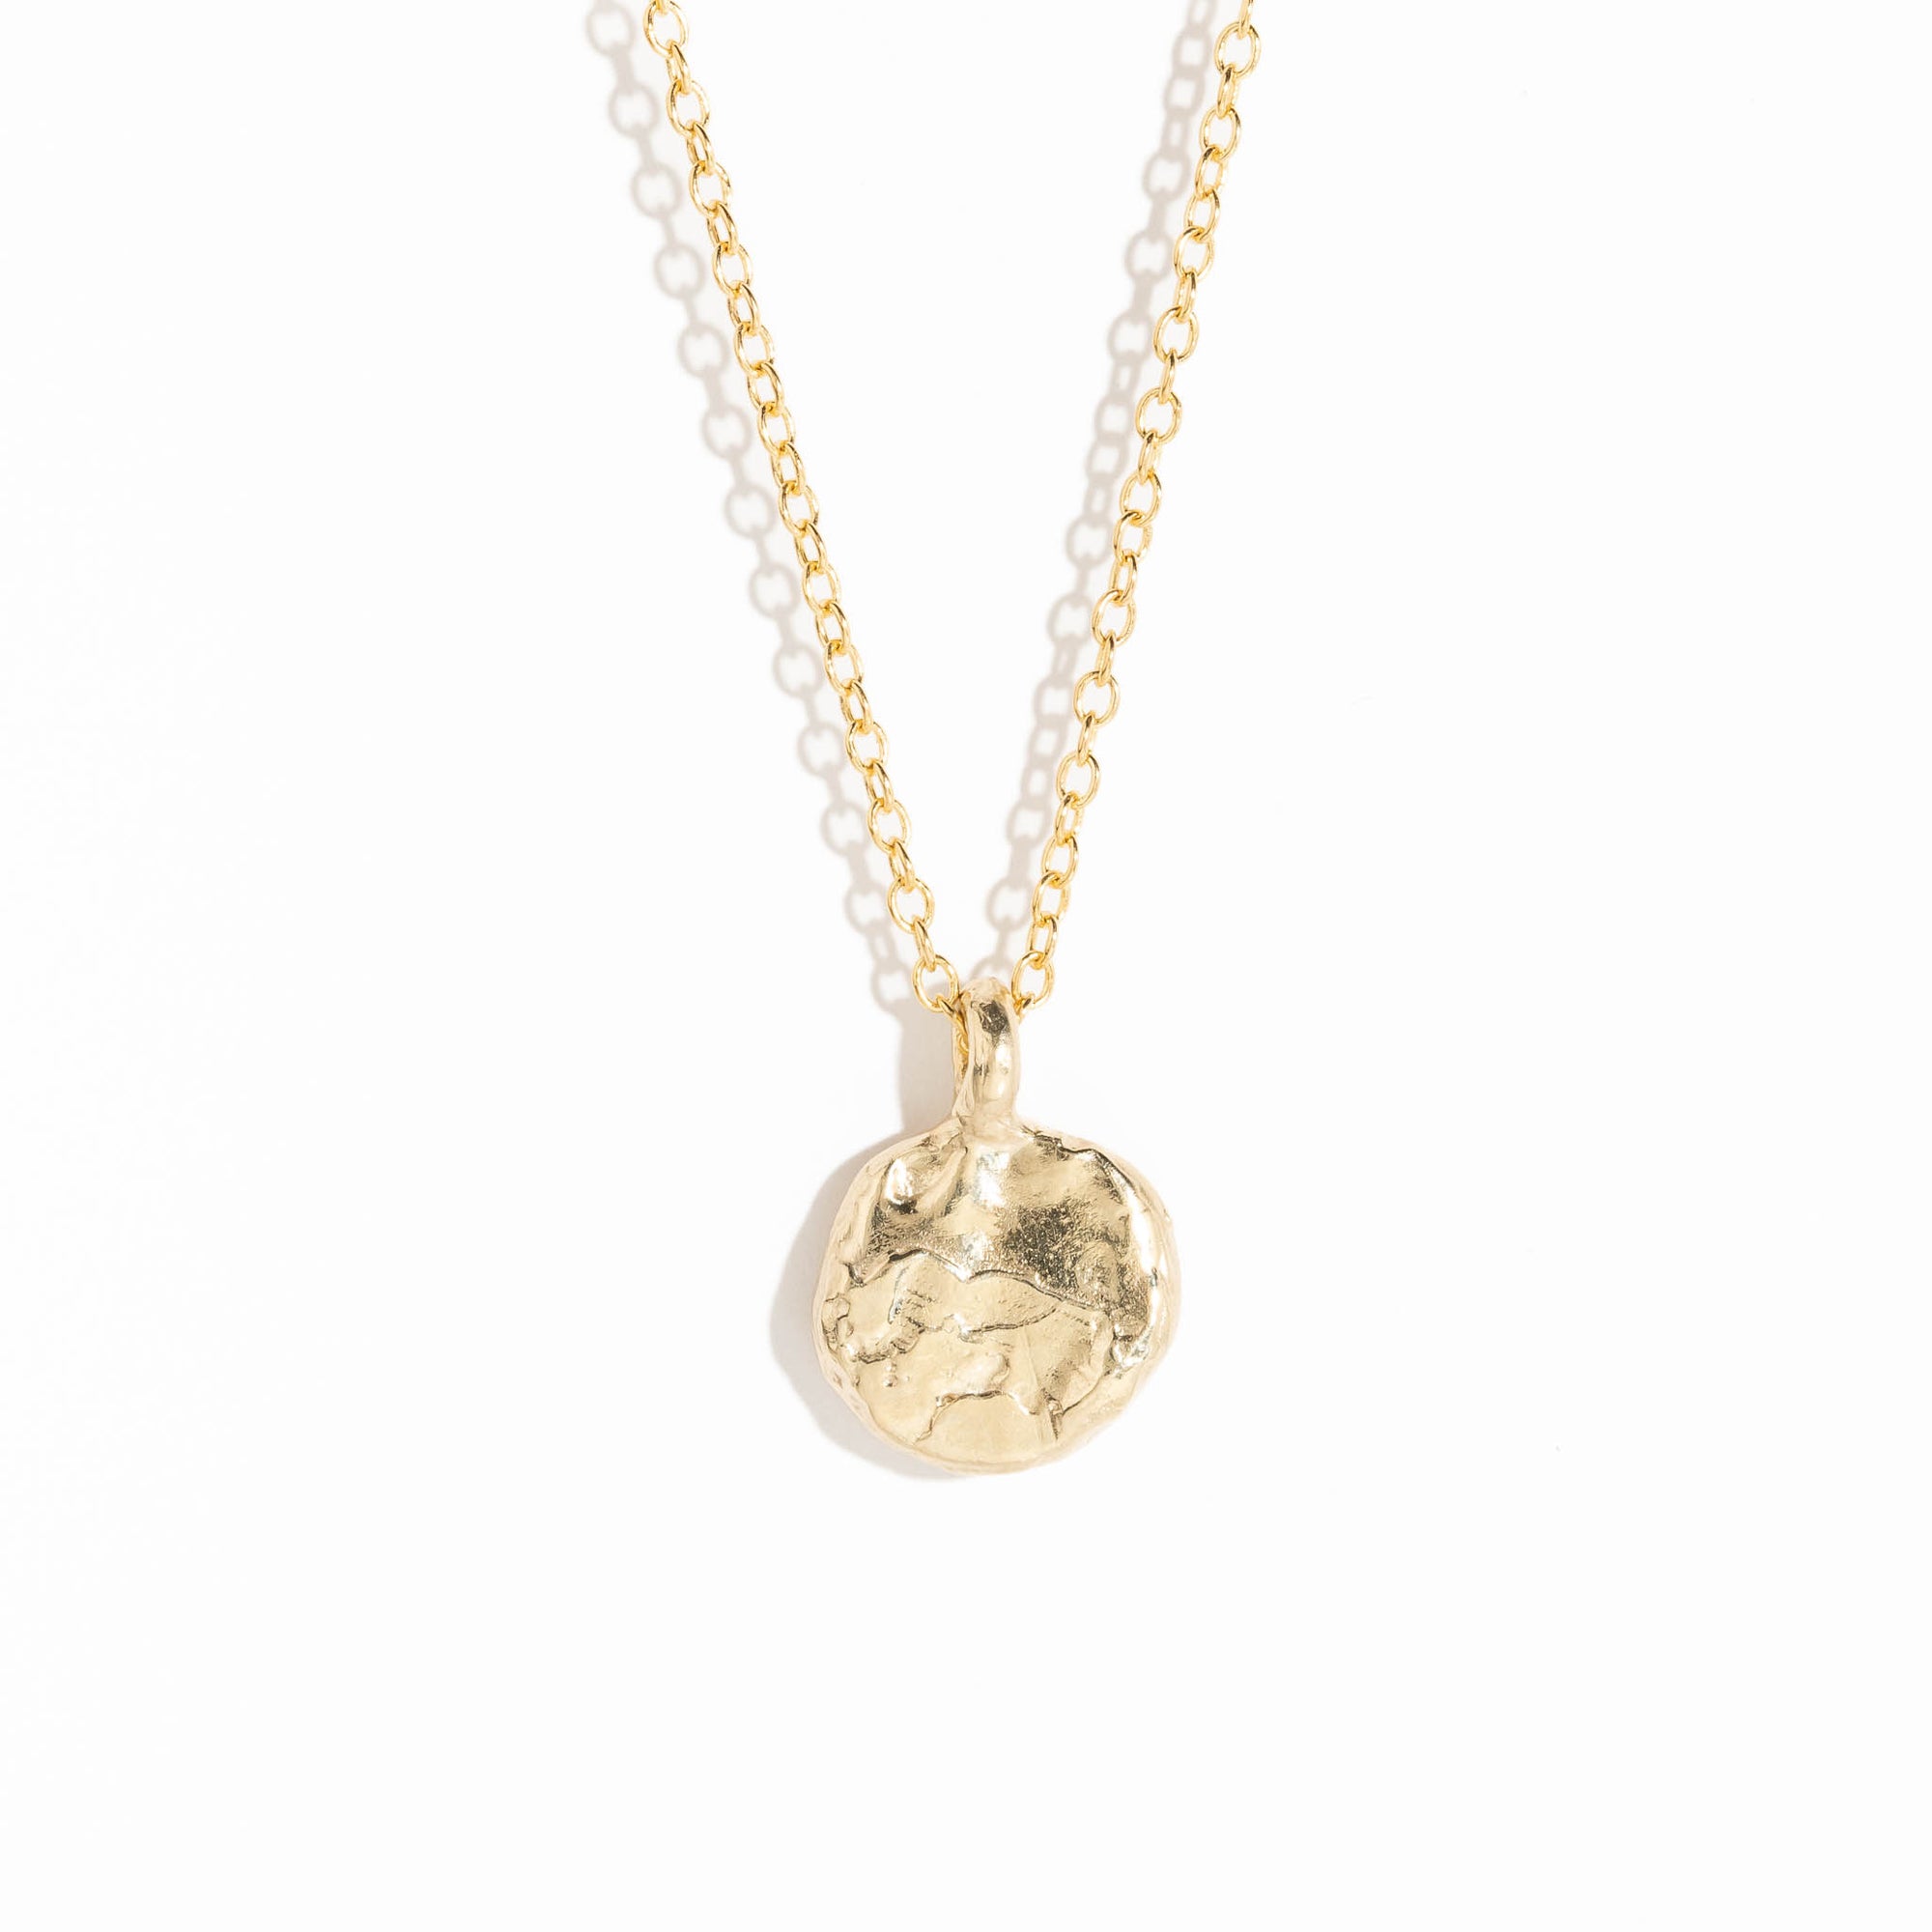 Pave Set White Diamond Necklace in 9 Carat Yellow Gold